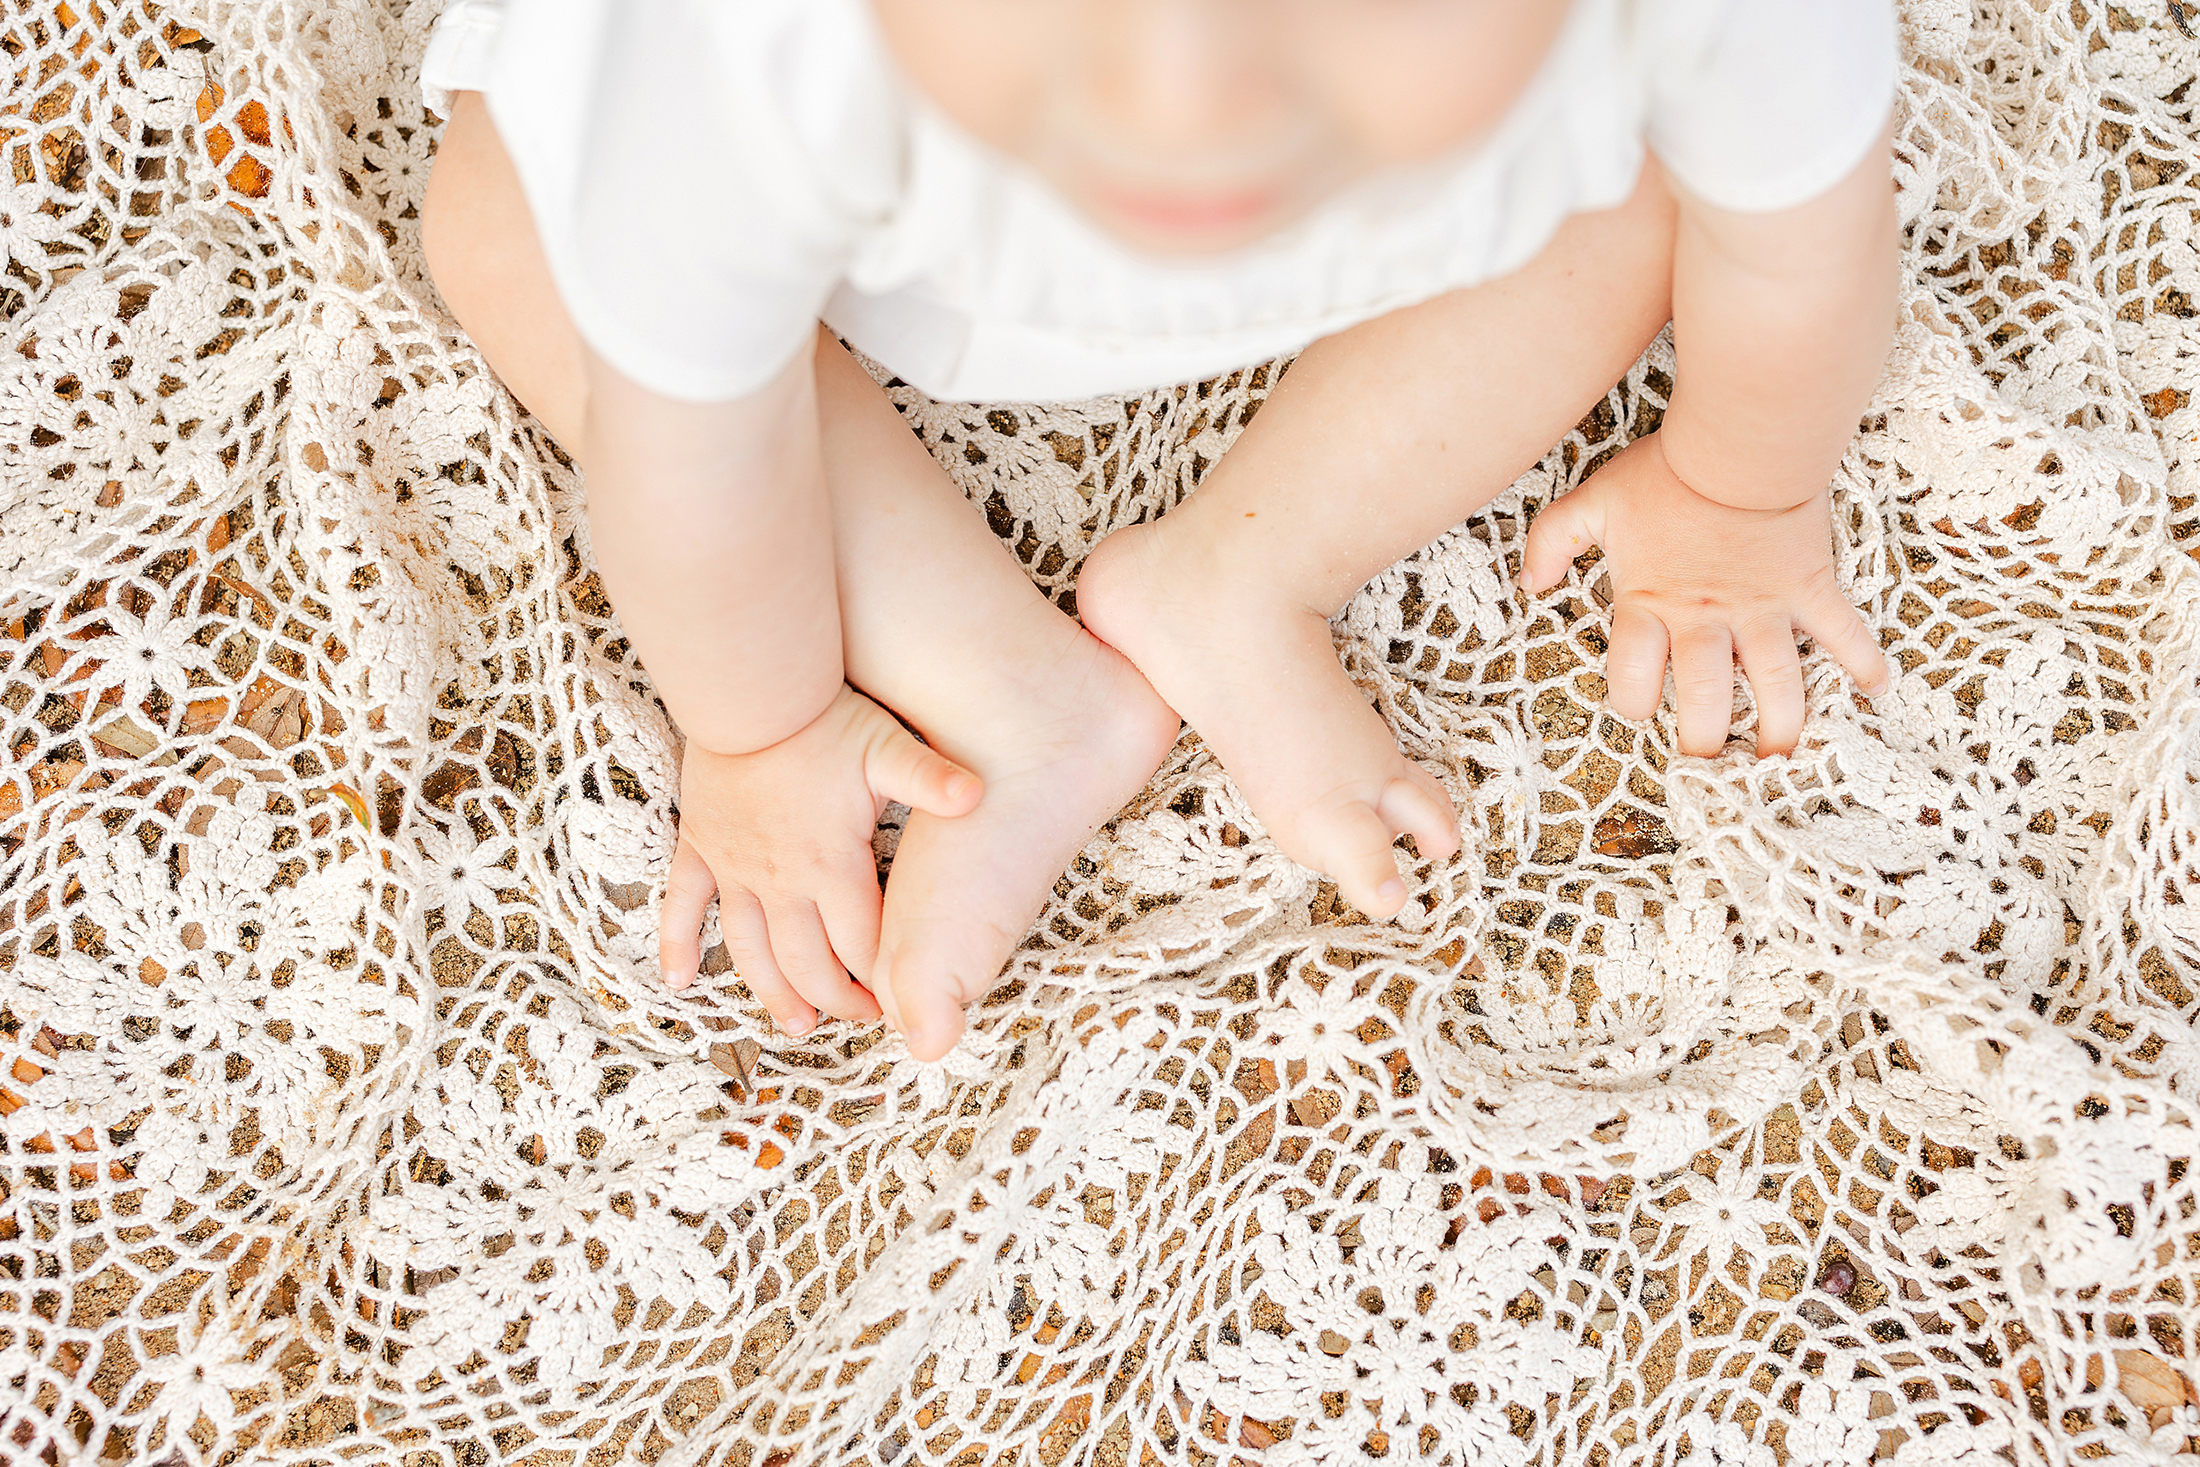 A light and airy portrait of a baby boy's feet sitting on a cream crochet blanket.